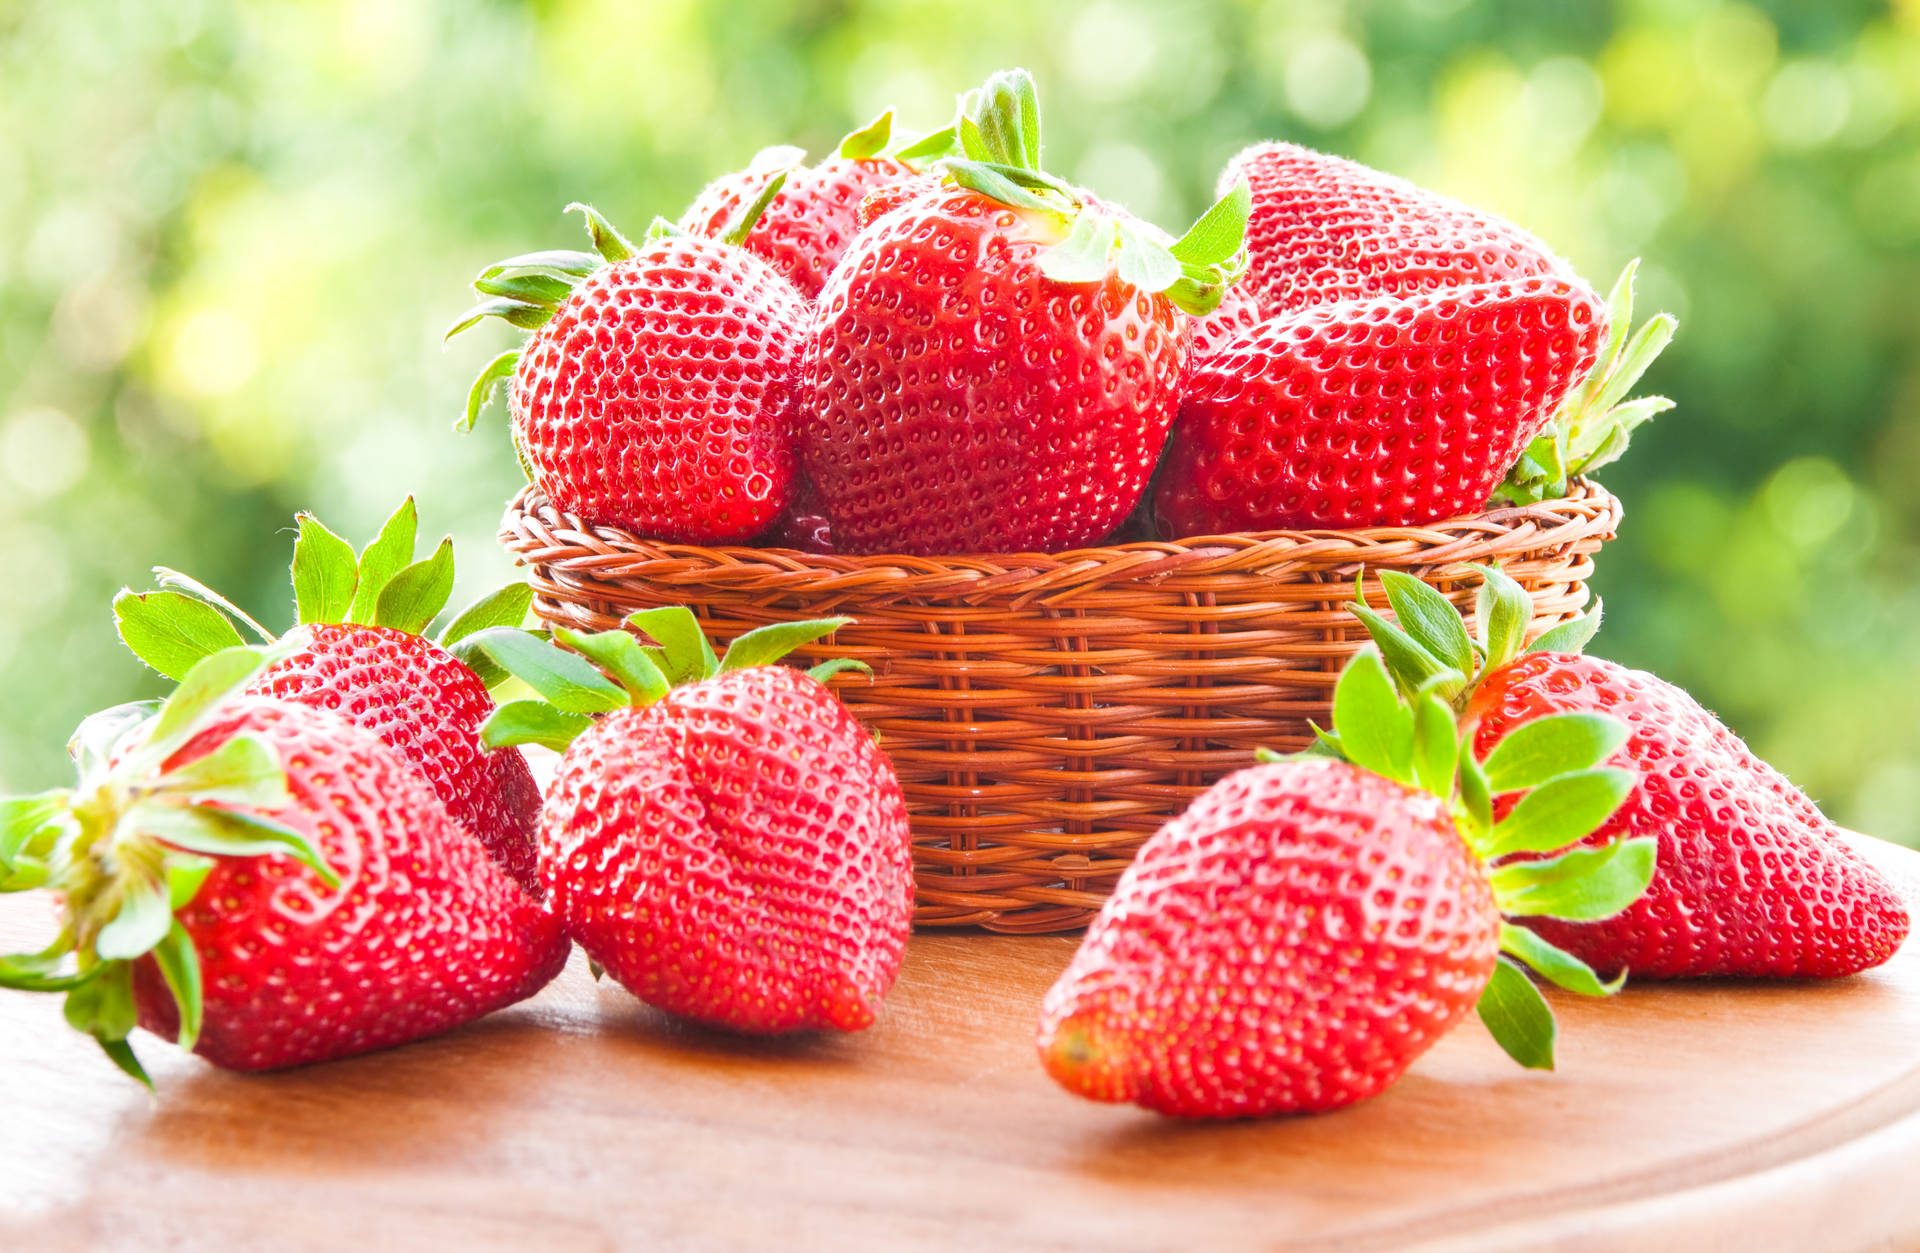 Wholesome Basket Of Strawberries Background